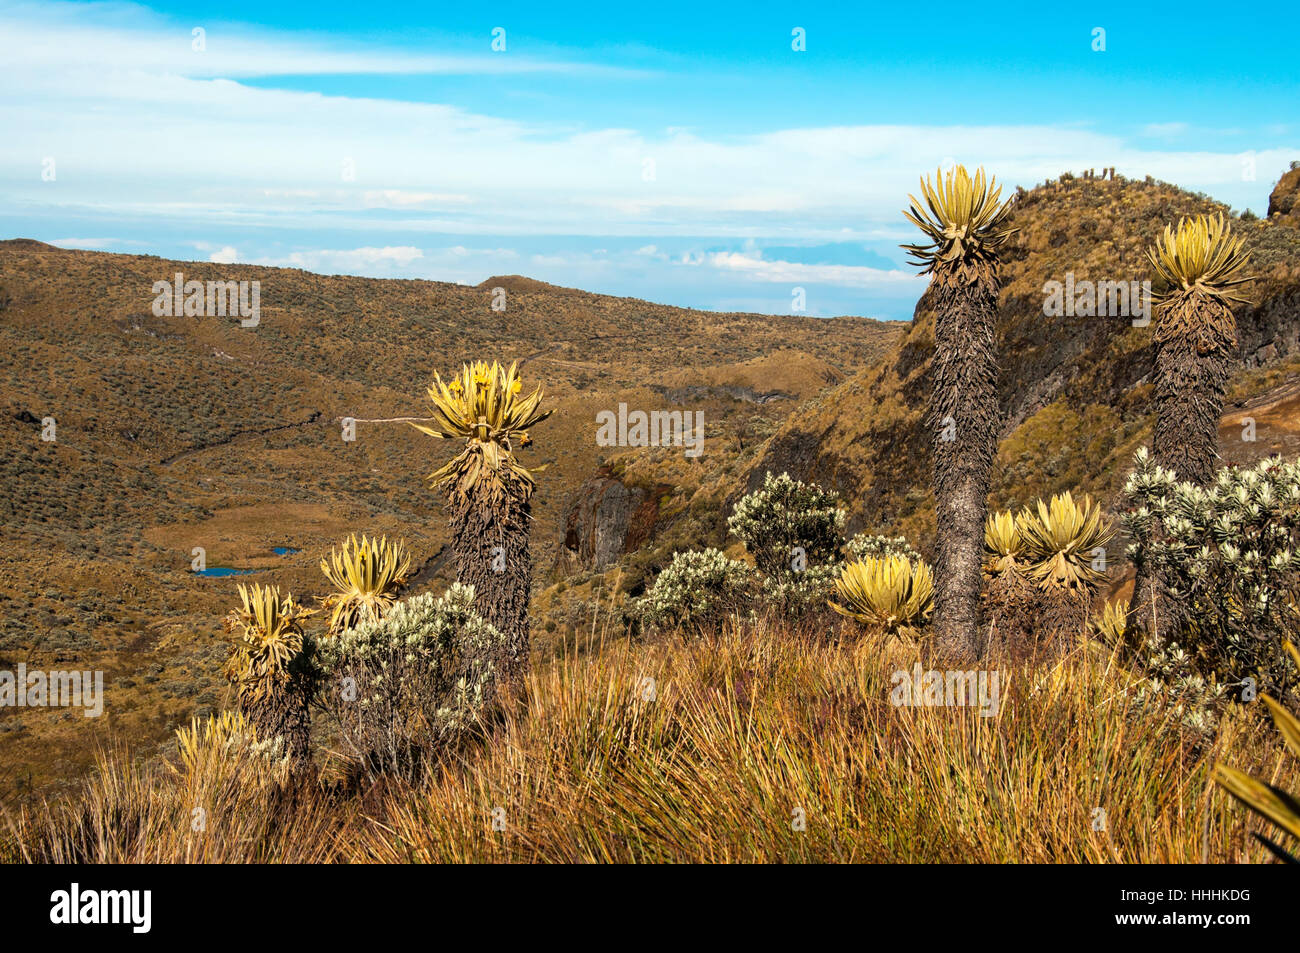 colombia, landscape, scenery, countryside, nature, andes, environment, Stock Photo